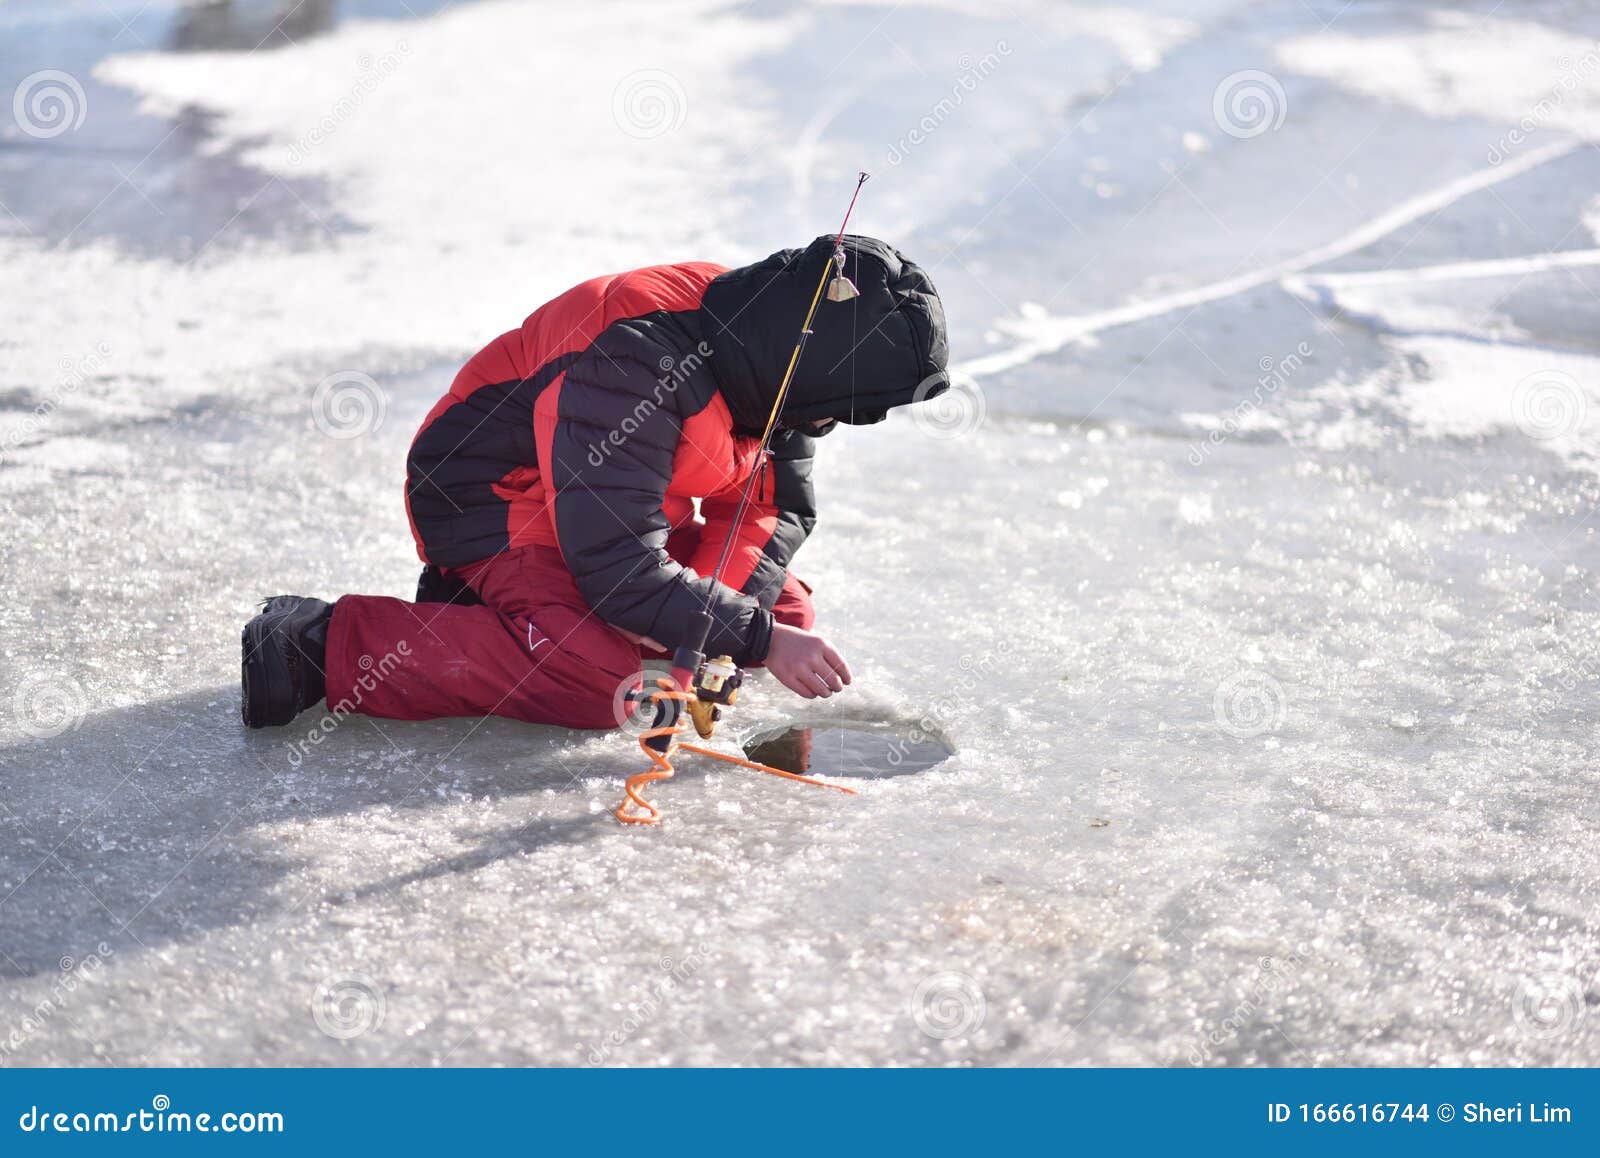 Boy Ice Fishing on Lake in Winter on a Sunny Day with Reflection in Water  Stock Photo - Image of beautiful, polennn: 166616744